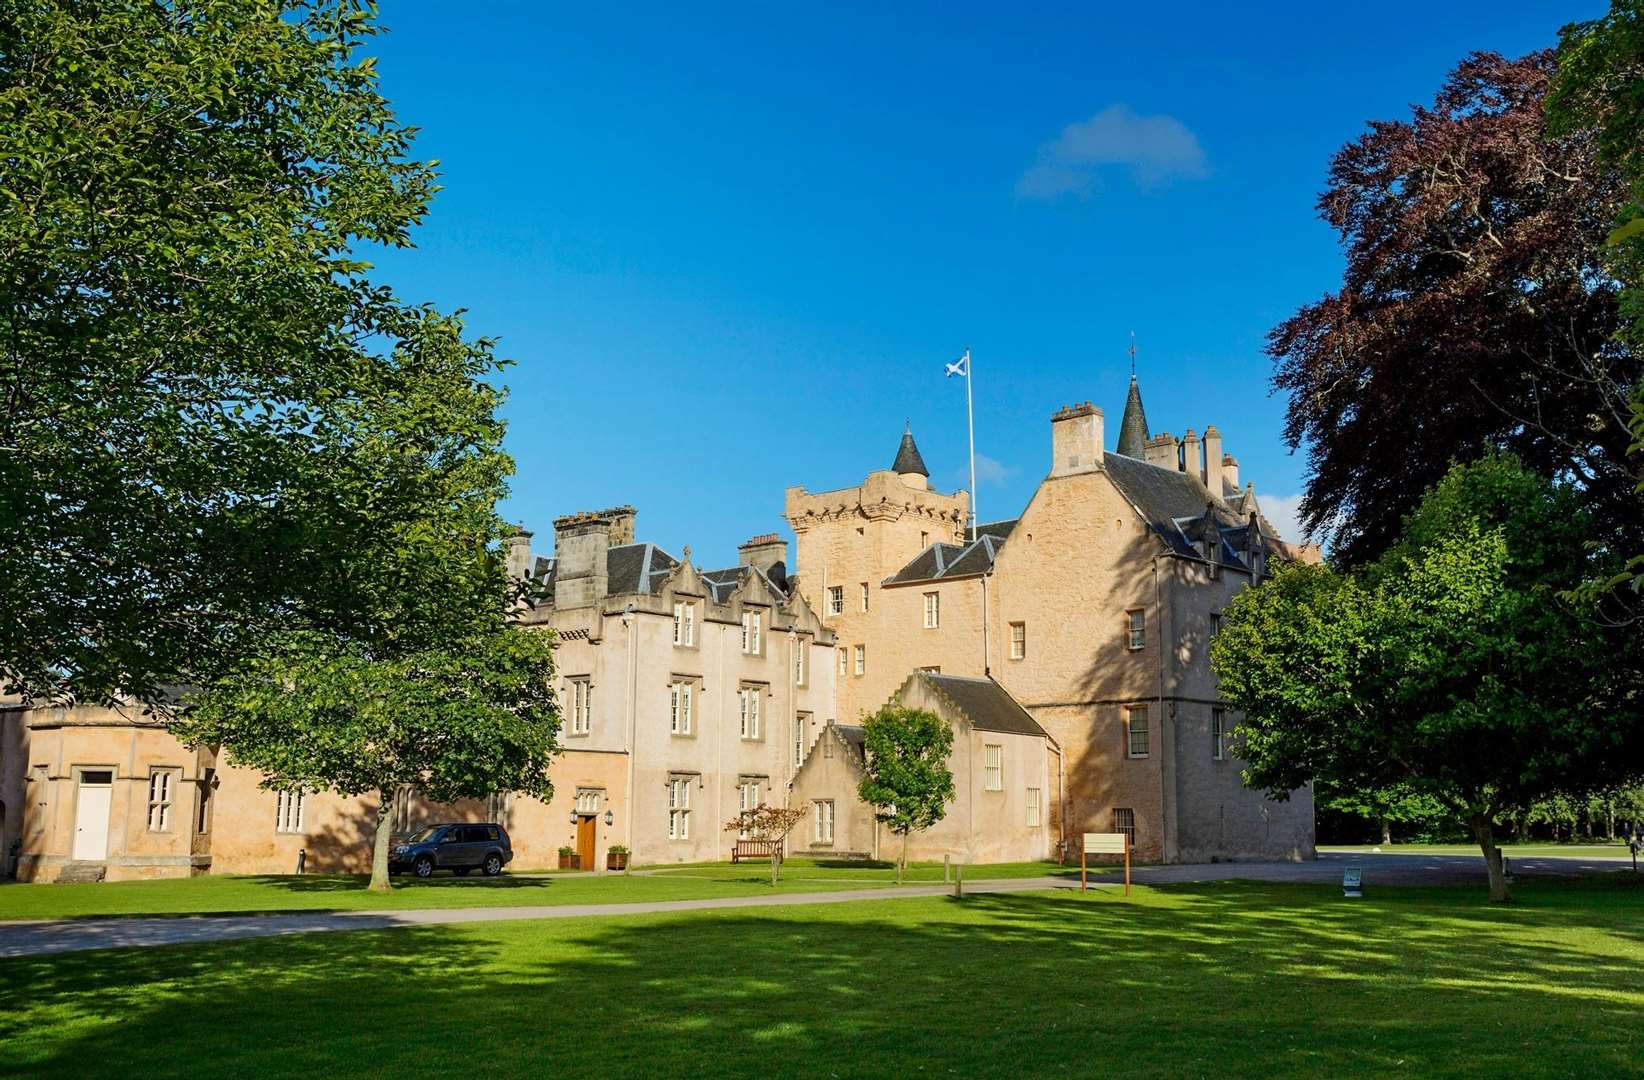 The castle and estate attract visitors from near and far. Picture: Paul Tomkins/ VisitScotland